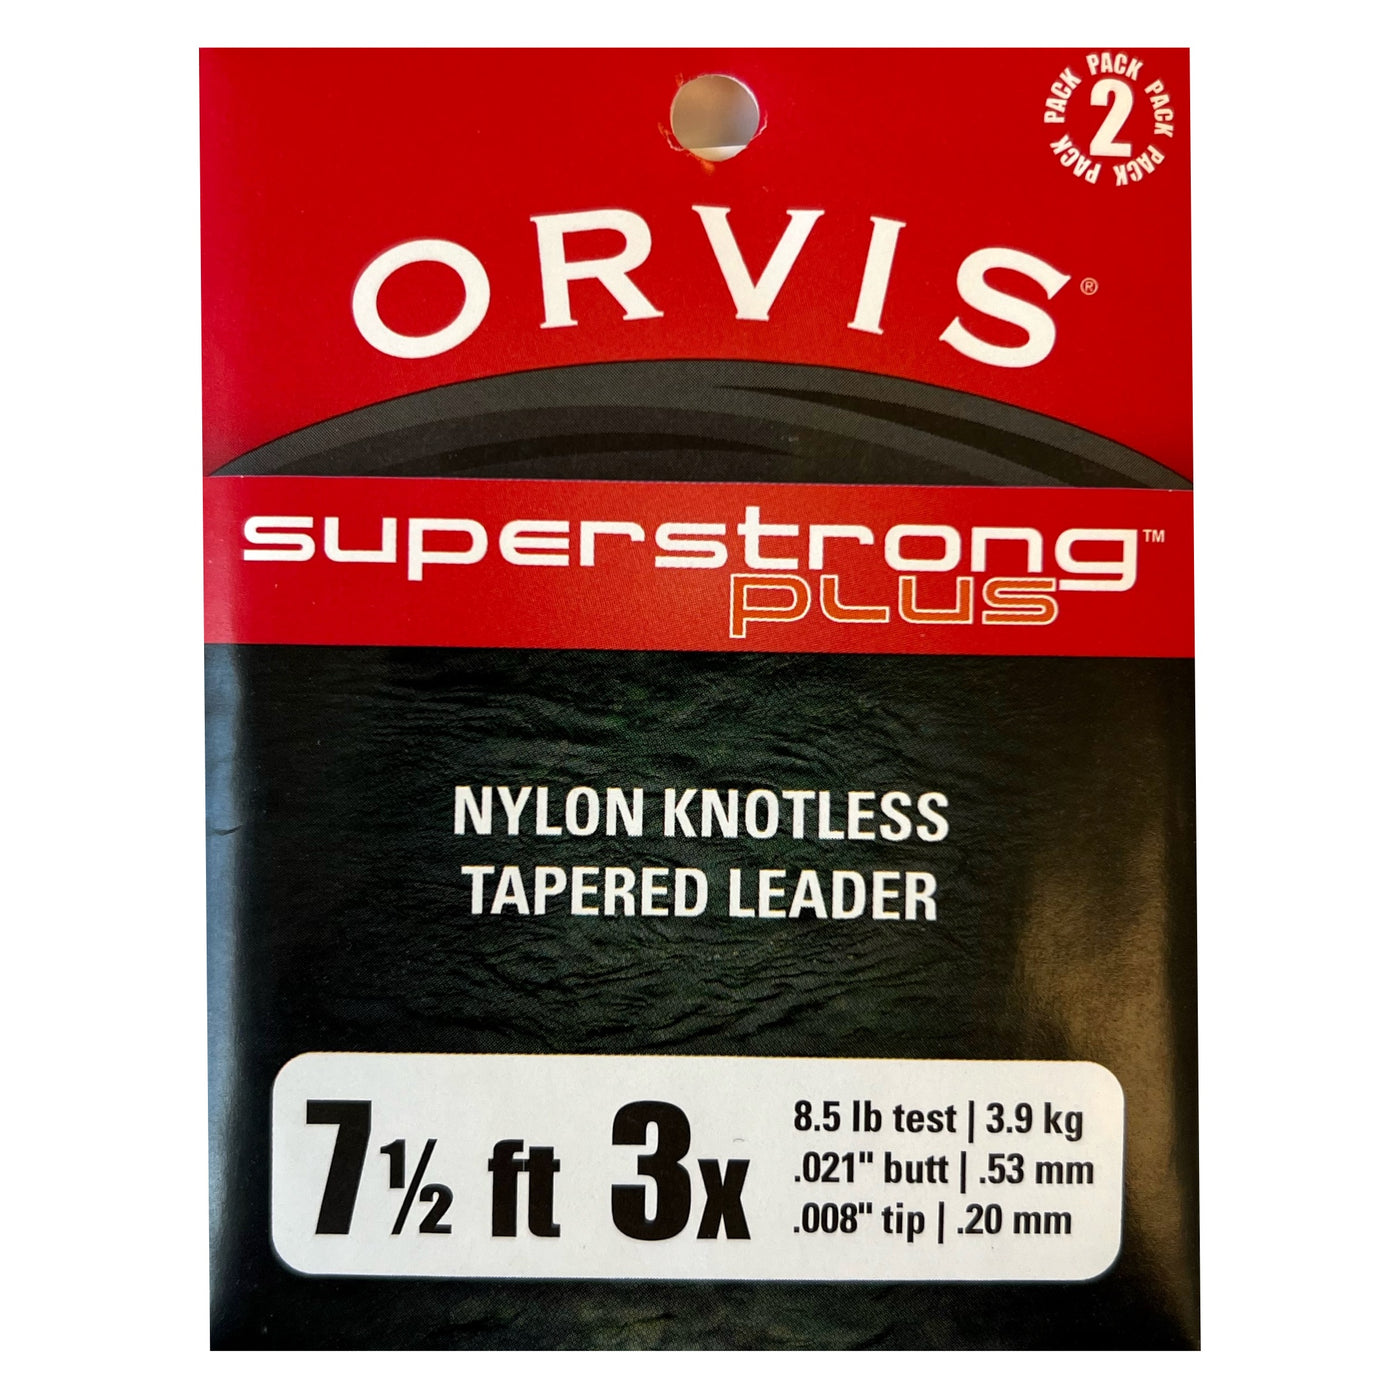 Orvis Superstrong Plus Leaders - 2 Pack - 7.5ft - 3X